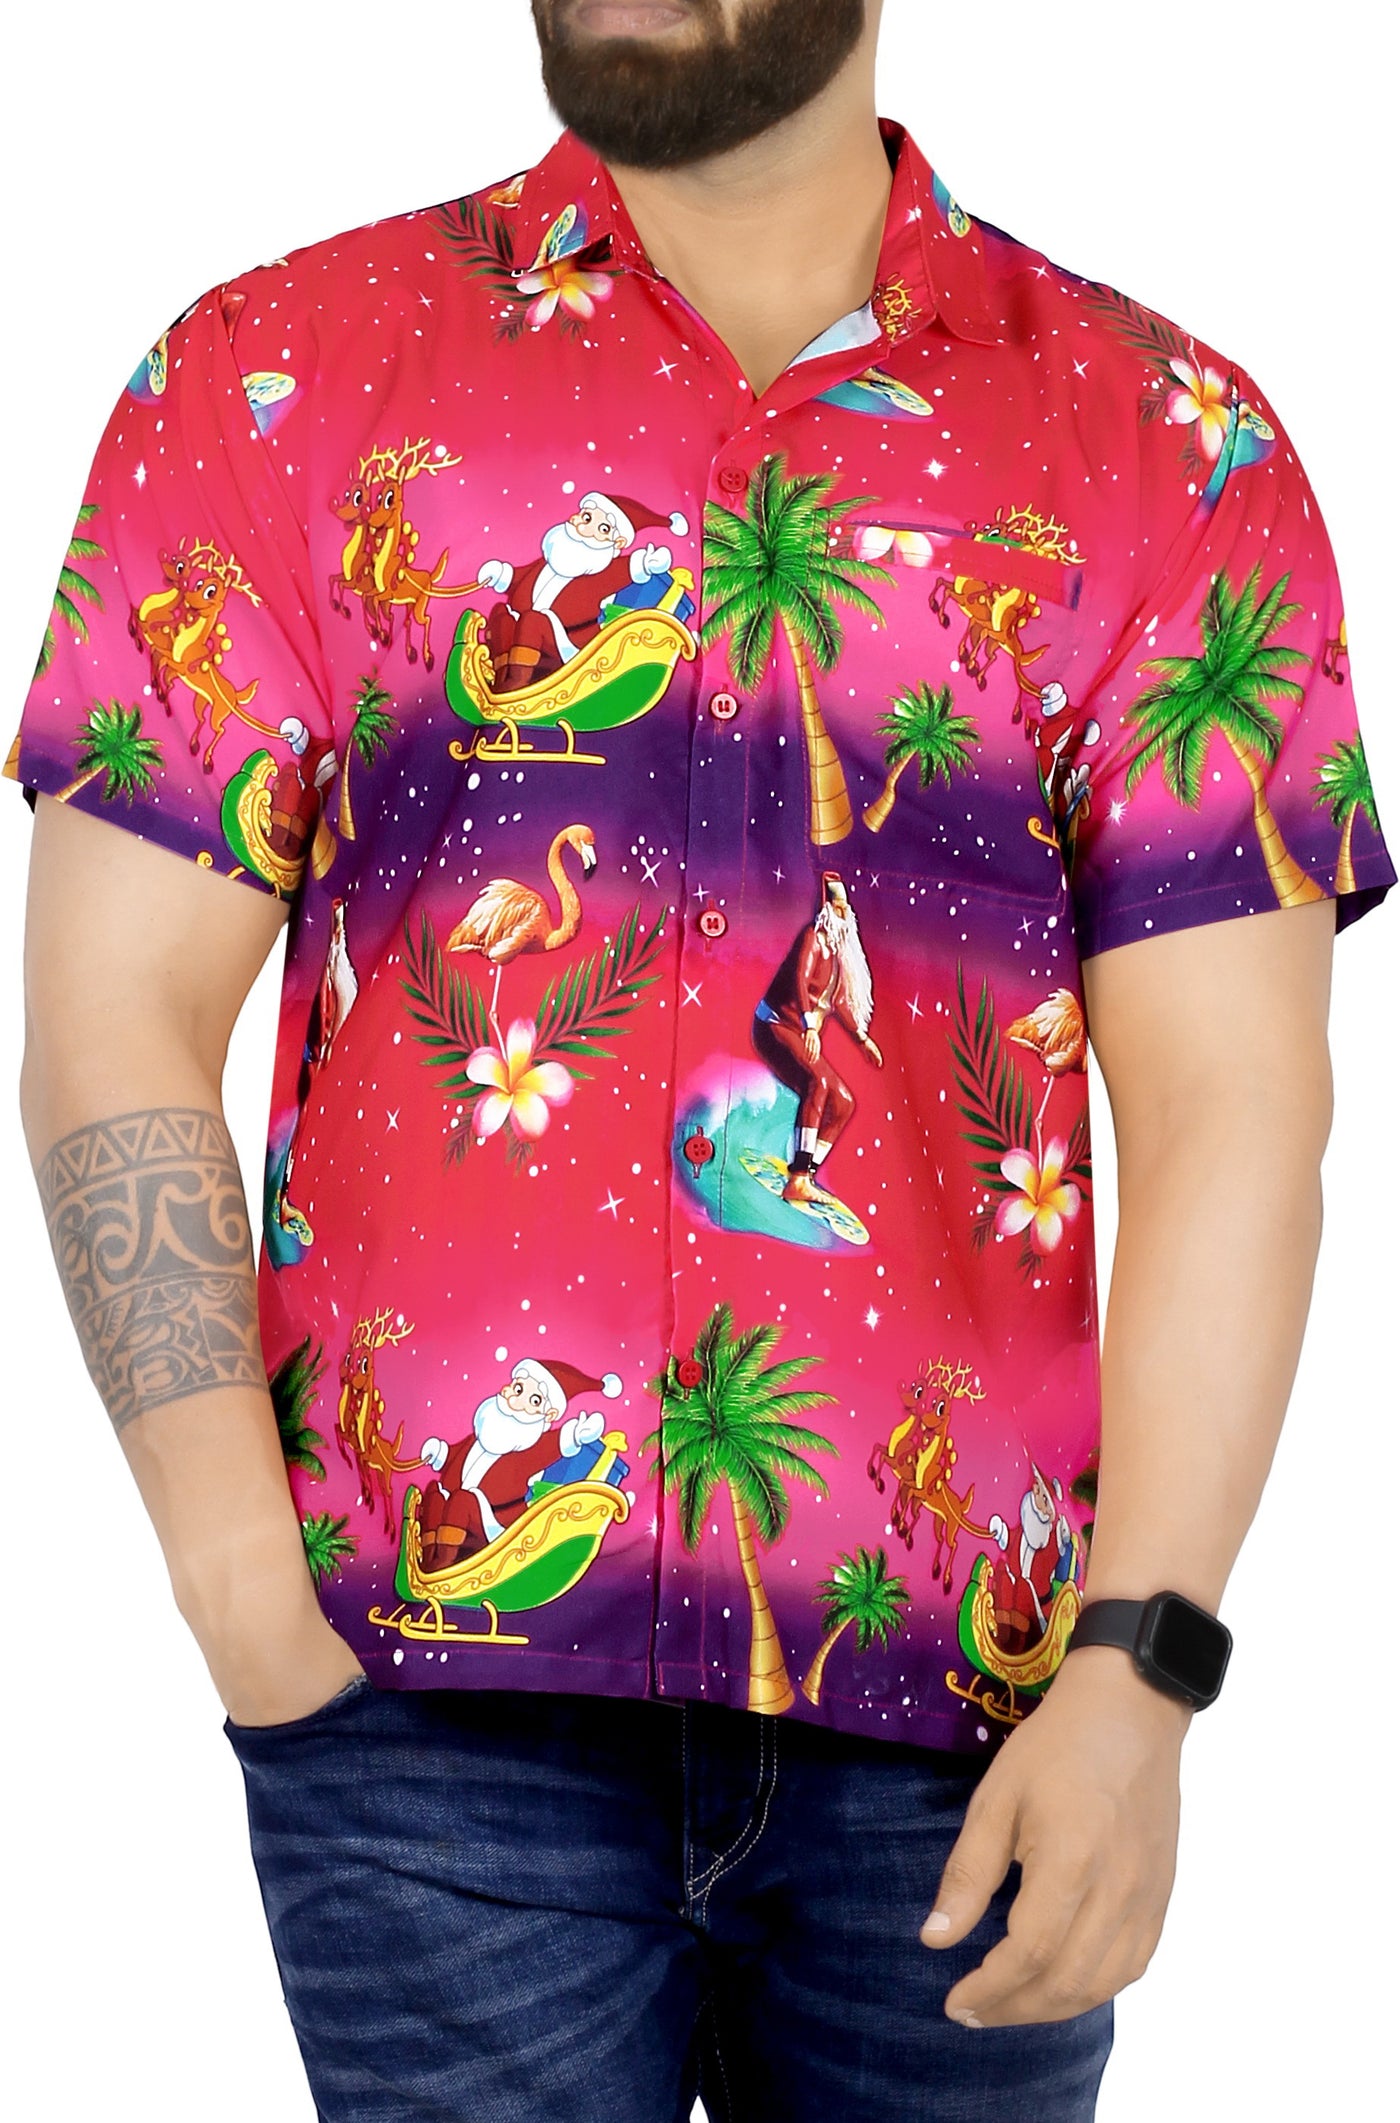 Ride the Waves with Santa Shirt For men